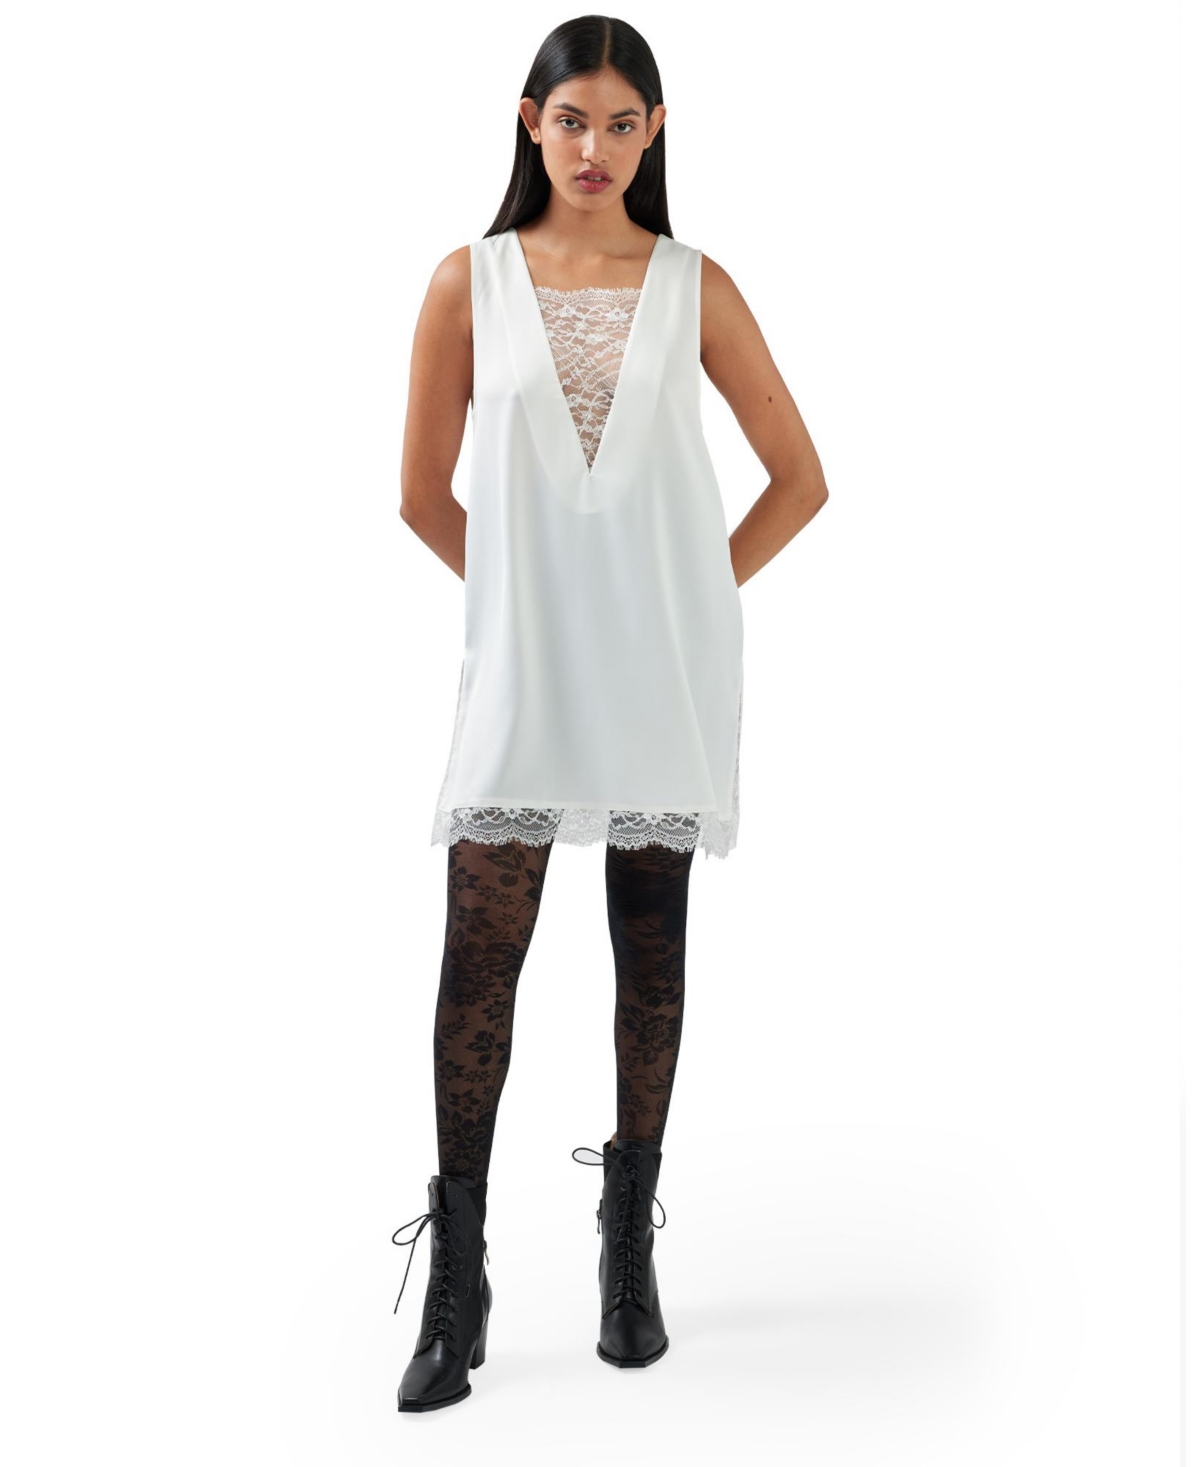 Women's After Party Lace Mini Dress - White